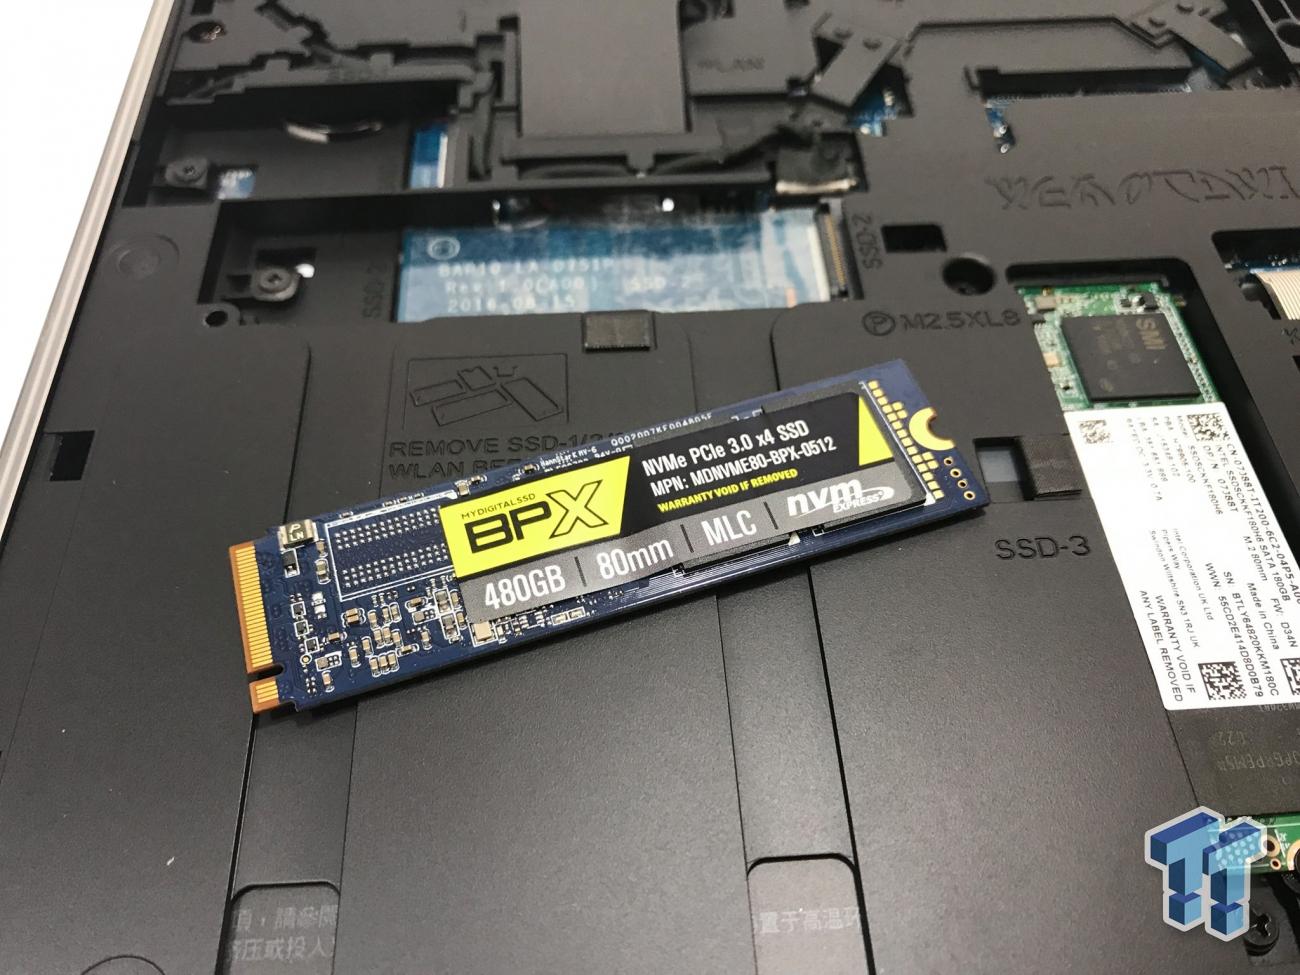 RAM Inside Alienware 17 R4 – disassembly Upgrading to an SSD - Alienware Us...